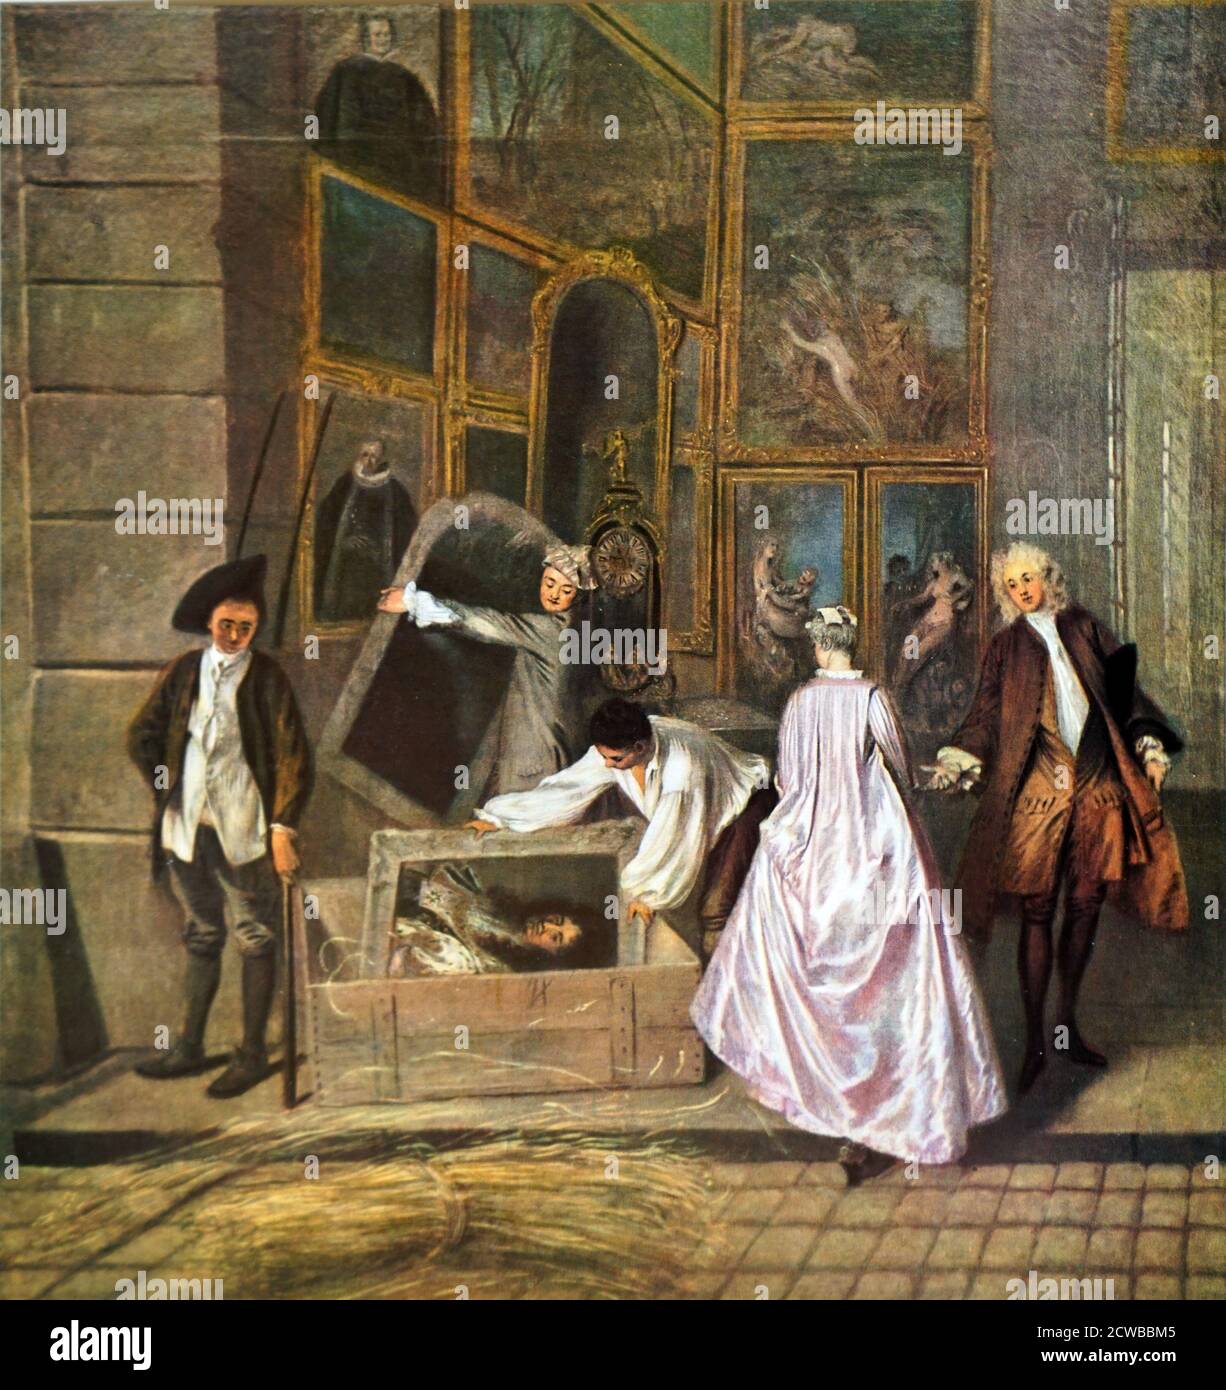 L'Enseigne de Gersaint (The Shop Sign of Gersaint); oil on canvas painting in the Charlottenburg Palace in Berlin, by French painter Jean-Antoine Watteau. Completed during 1720-21. it is considered to be the last prominent work of Watteau, who died some time after. It was painted as a shop sign for the marchand-mercier, or art dealer, Edme Francois Gersaint Stock Photo